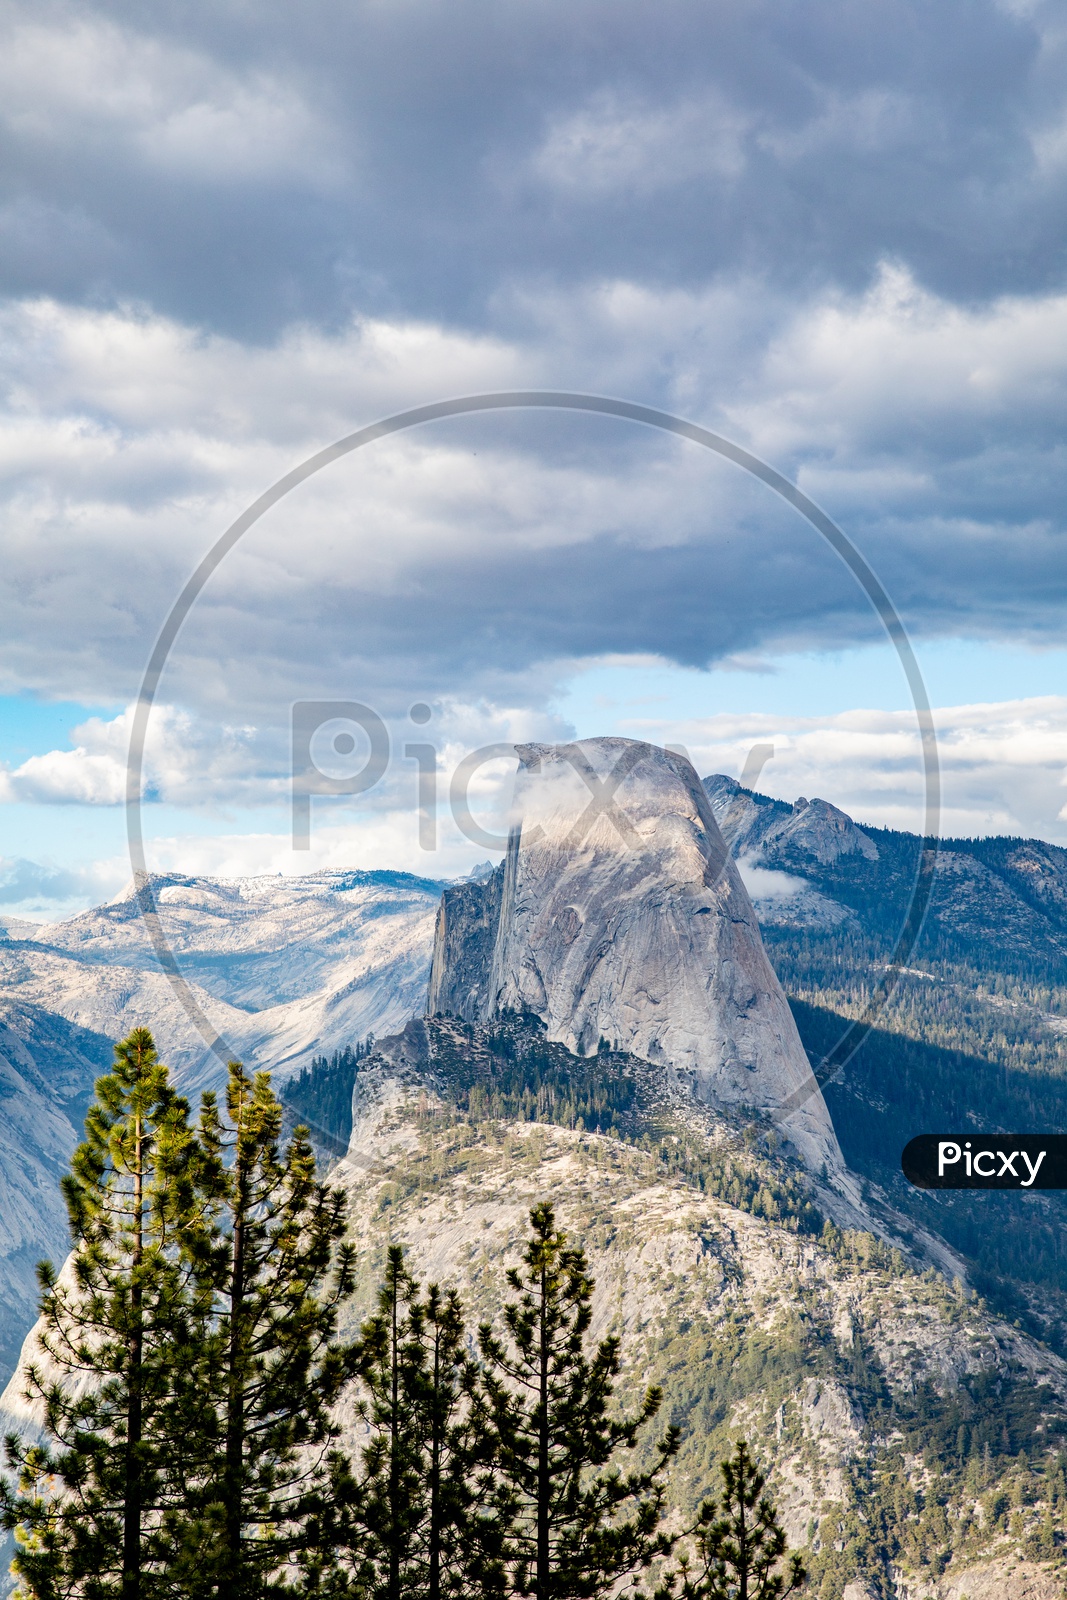 A Beautiful Mountain  Valley With Snow Capped Mountains and Blue Sky With  Clouds In Background